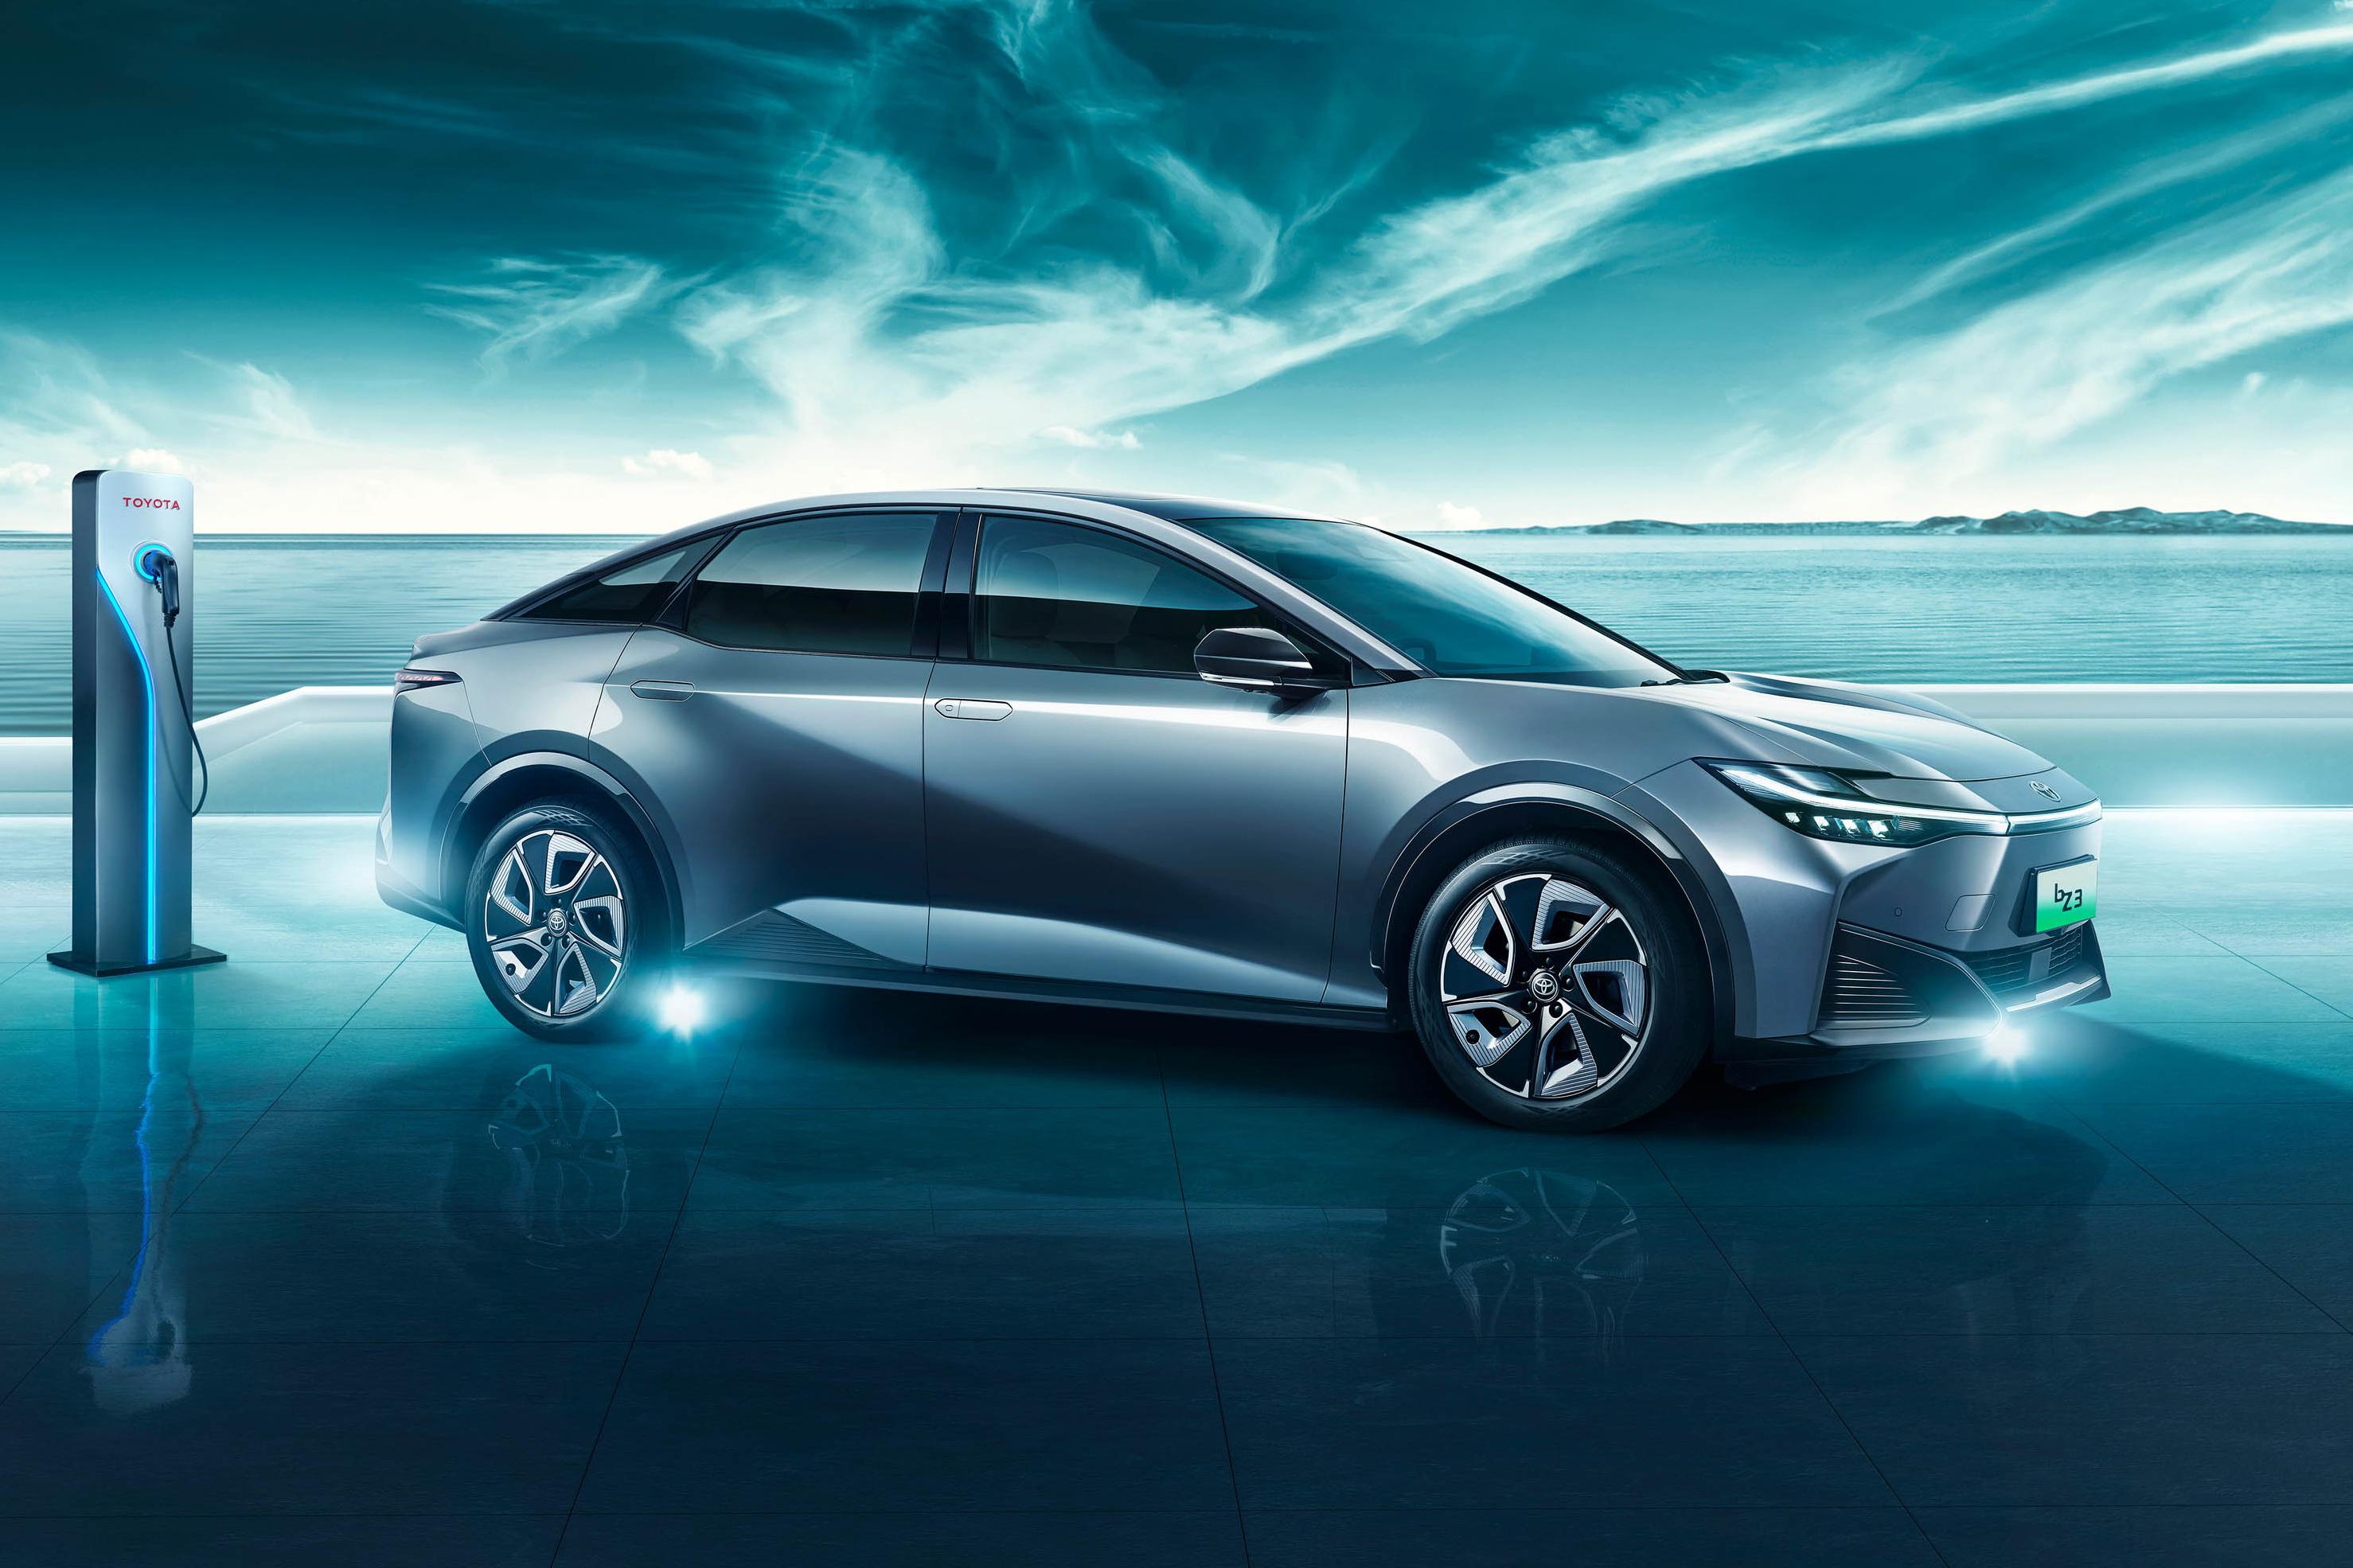 hybrid leader toyota to use another company’s hybrid system – report